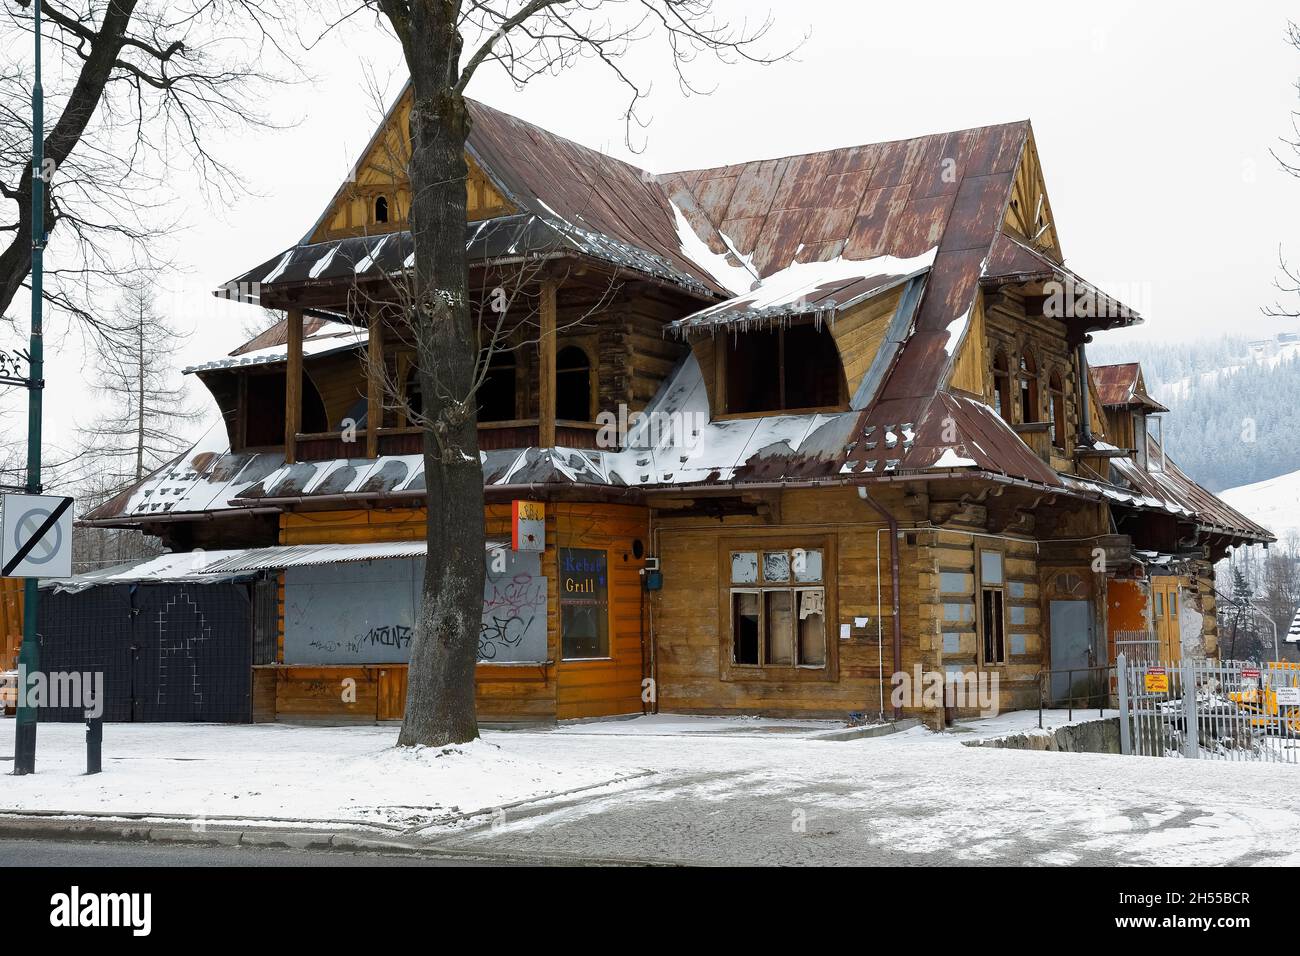 Zakopane, Poland - March 19, 2018: The old villa, commonly known as Turnia , dates back to 1906. Today, as you can see, it is abandoned, neglected and Stock Photo